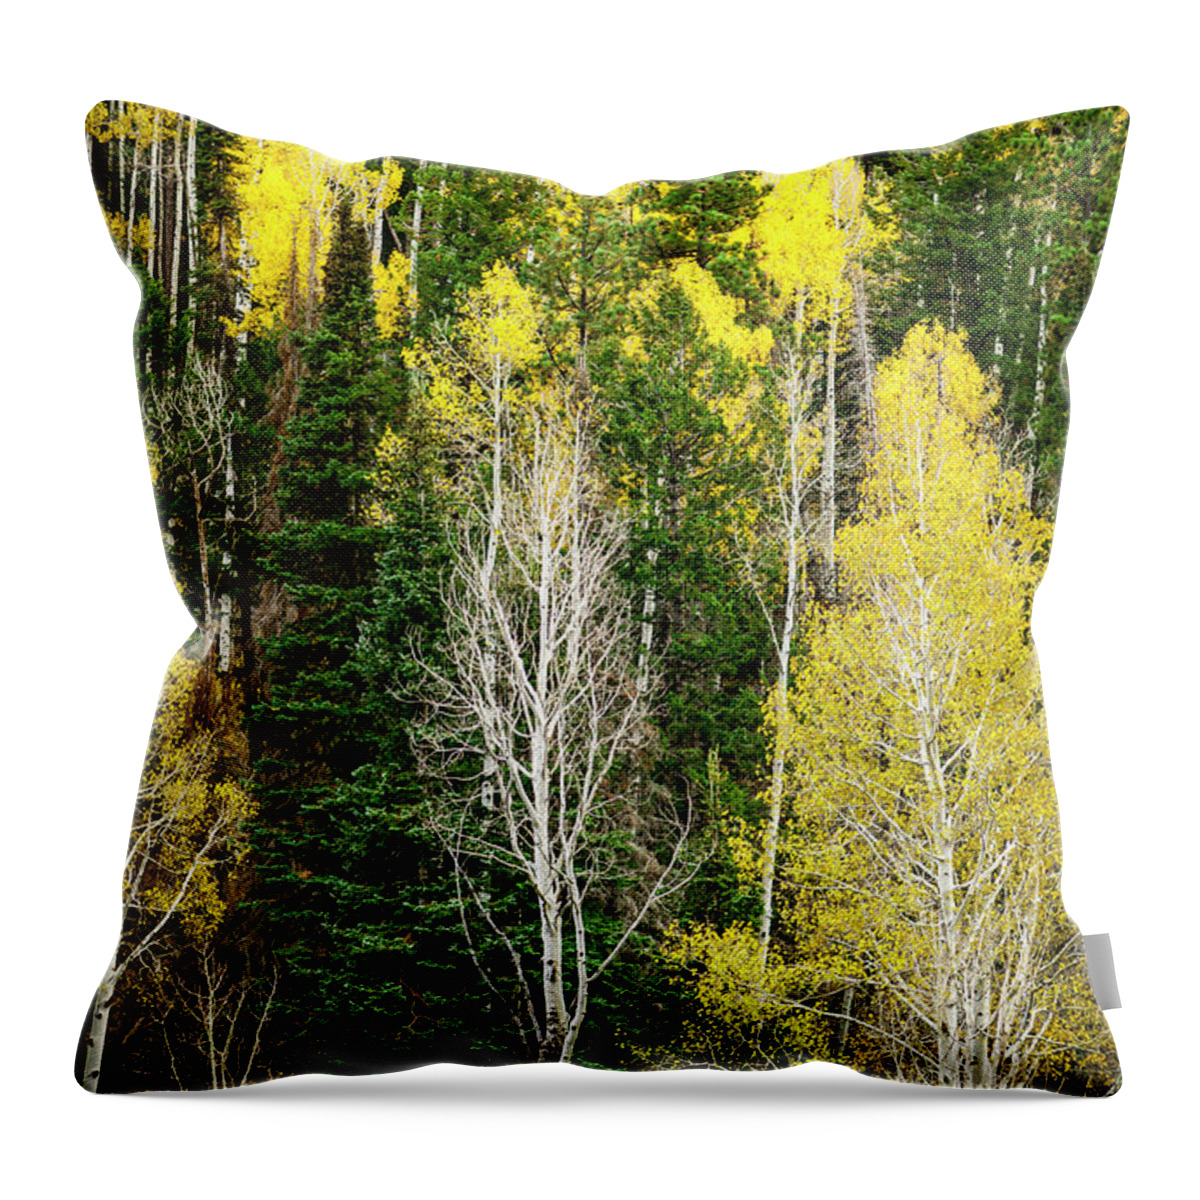 Scenics Throw Pillow featuring the photograph Aspens And Evergreens, North Rim, Grand by Eric R. Hinson